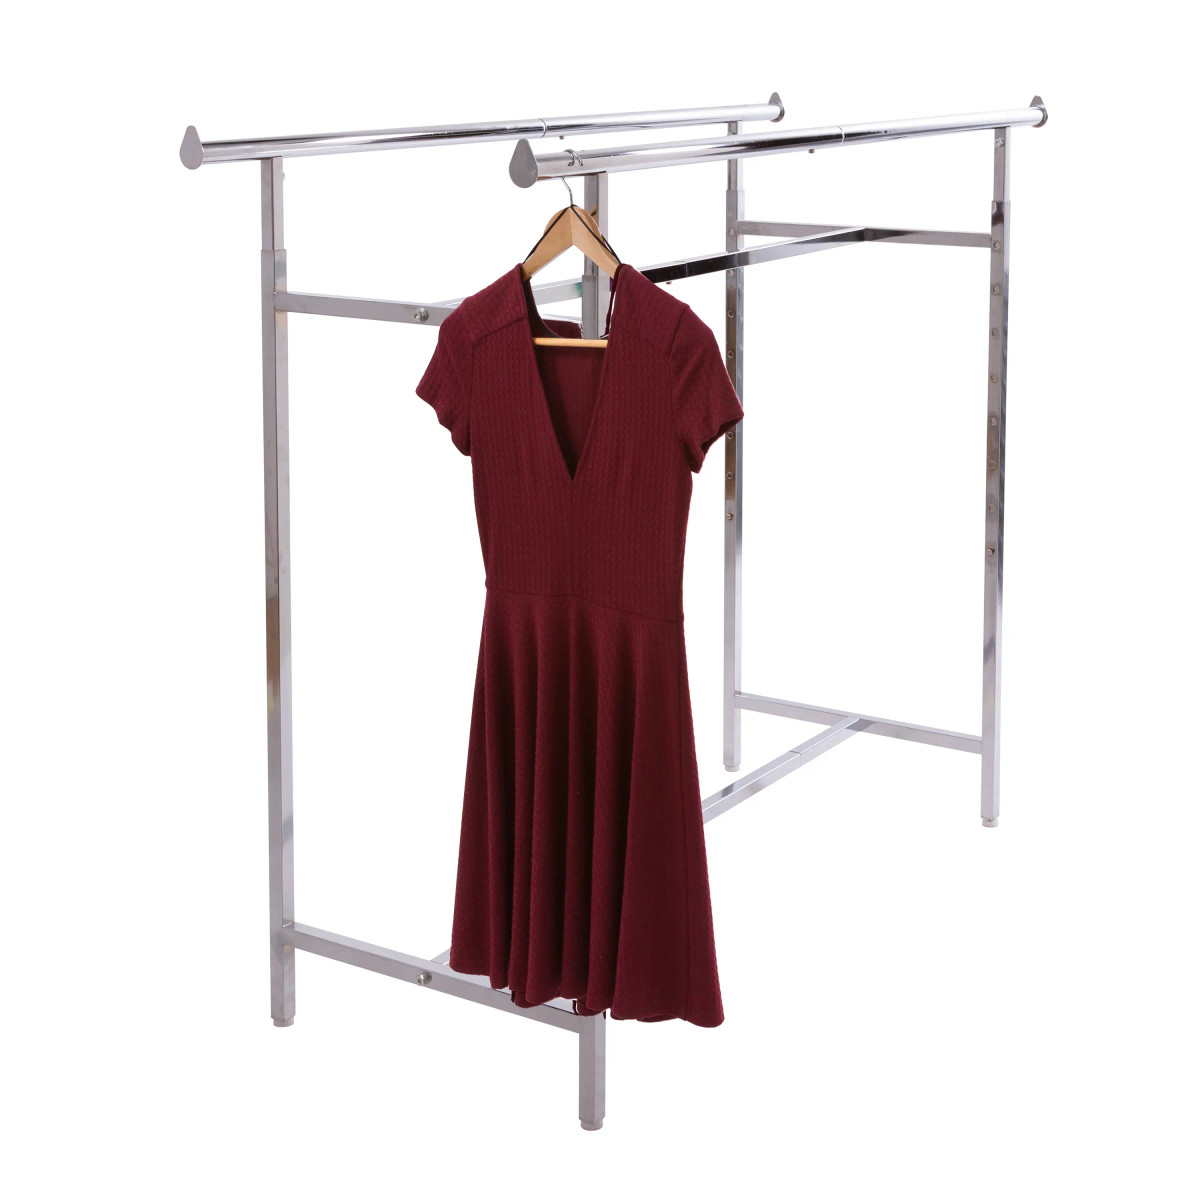 72" Adjustable Height Double Bar Rack with Top Basket Clothing Display 